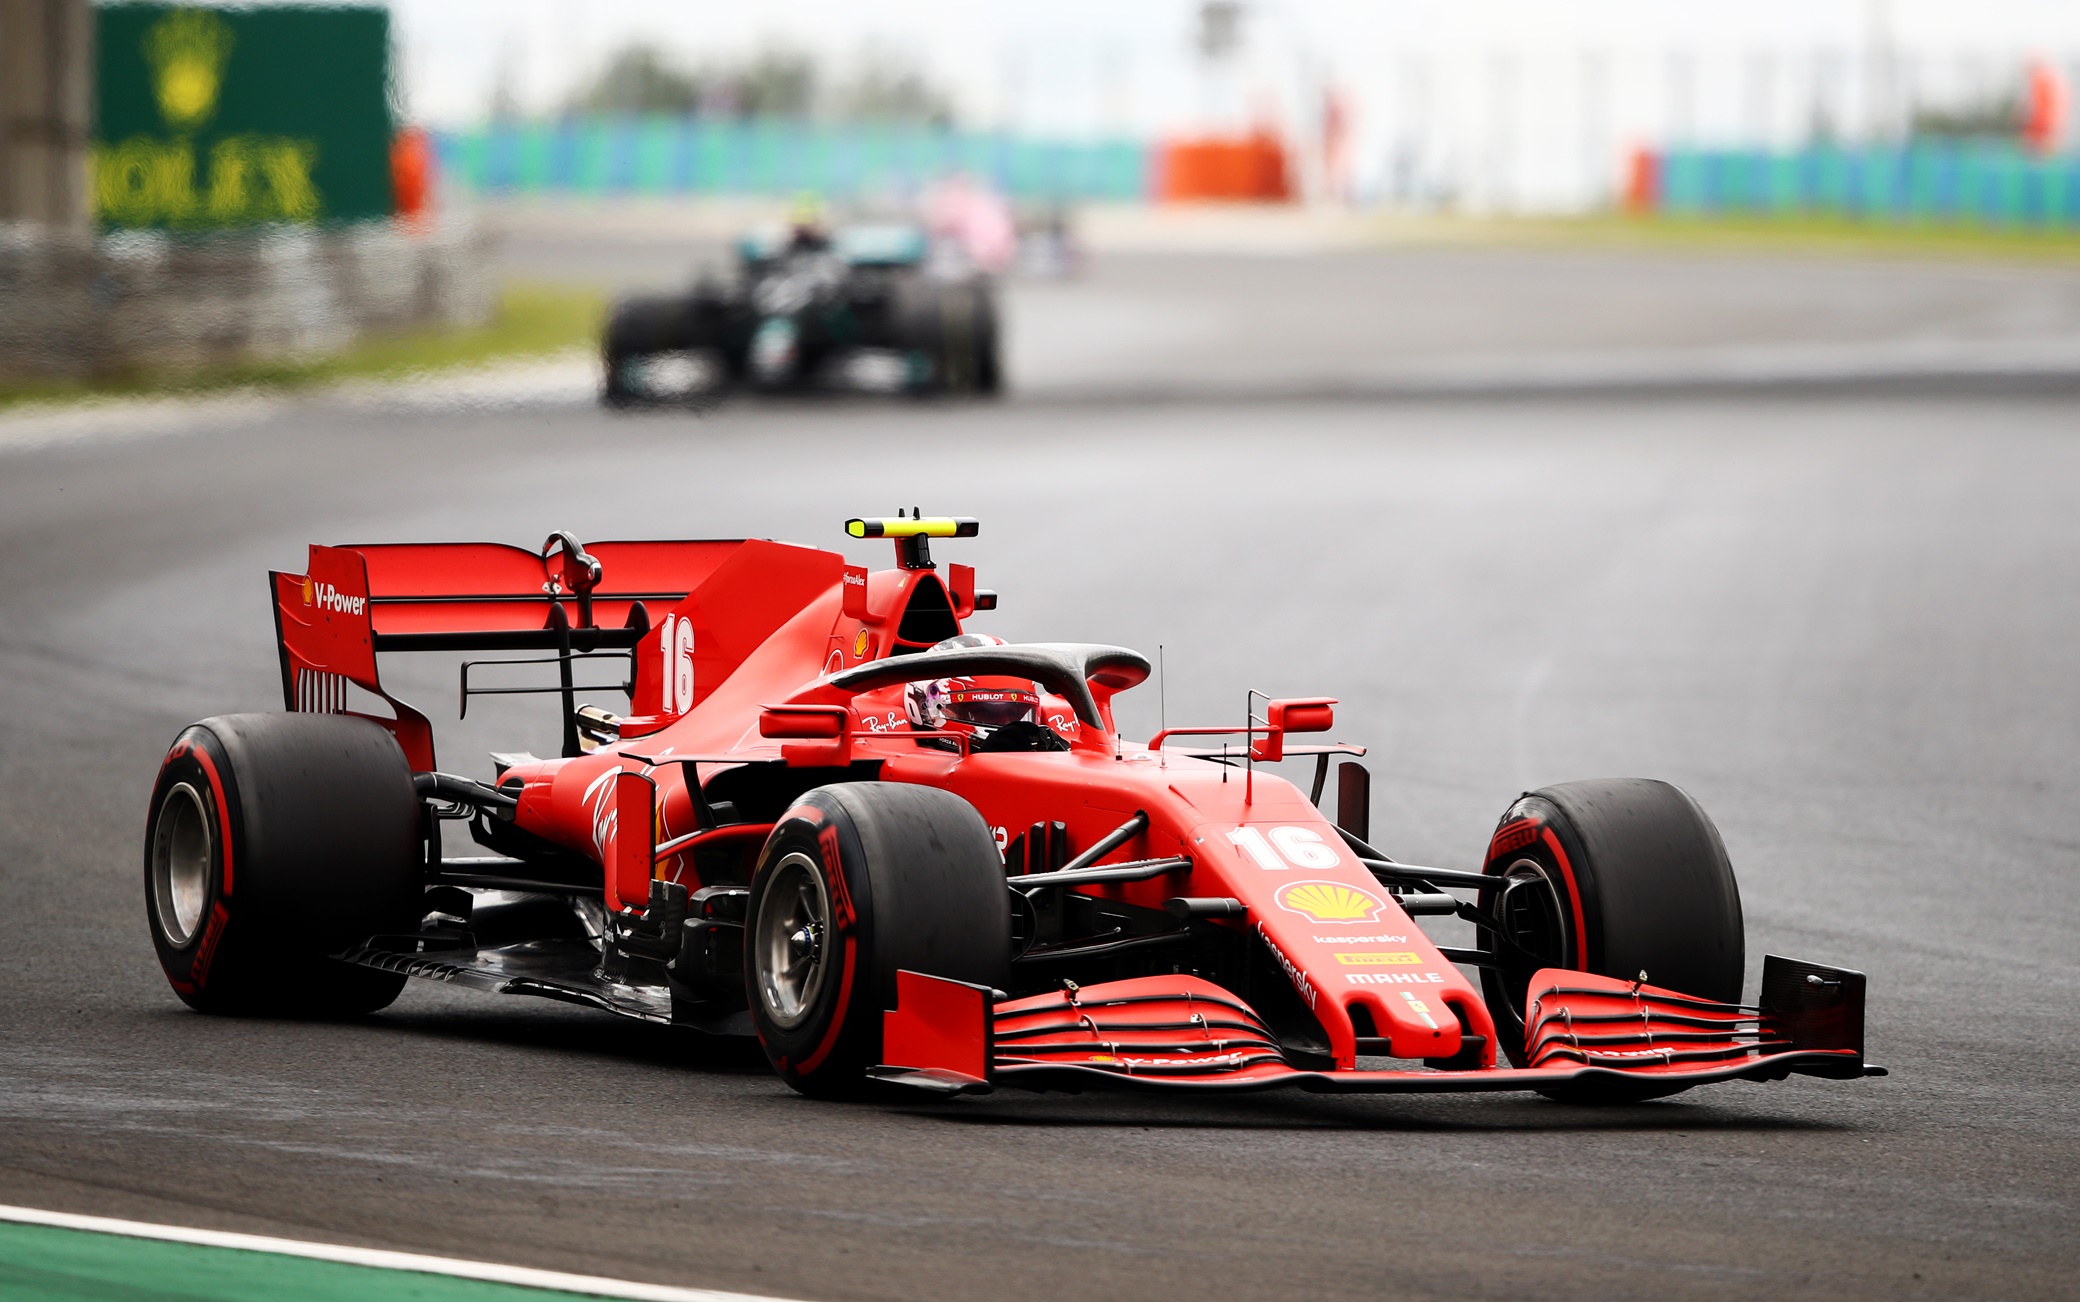 BUDAPEST, HUNGARY - JULY 19: Charles Leclerc of Monaco driving the (16) Scuderia Ferrari SF1000 on track during the Formula One Grand Prix of Hungary at Hungaroring on July 19, 2020 in Budapest, Hungary. (Photo by Bryn Lennon/Getty Images)